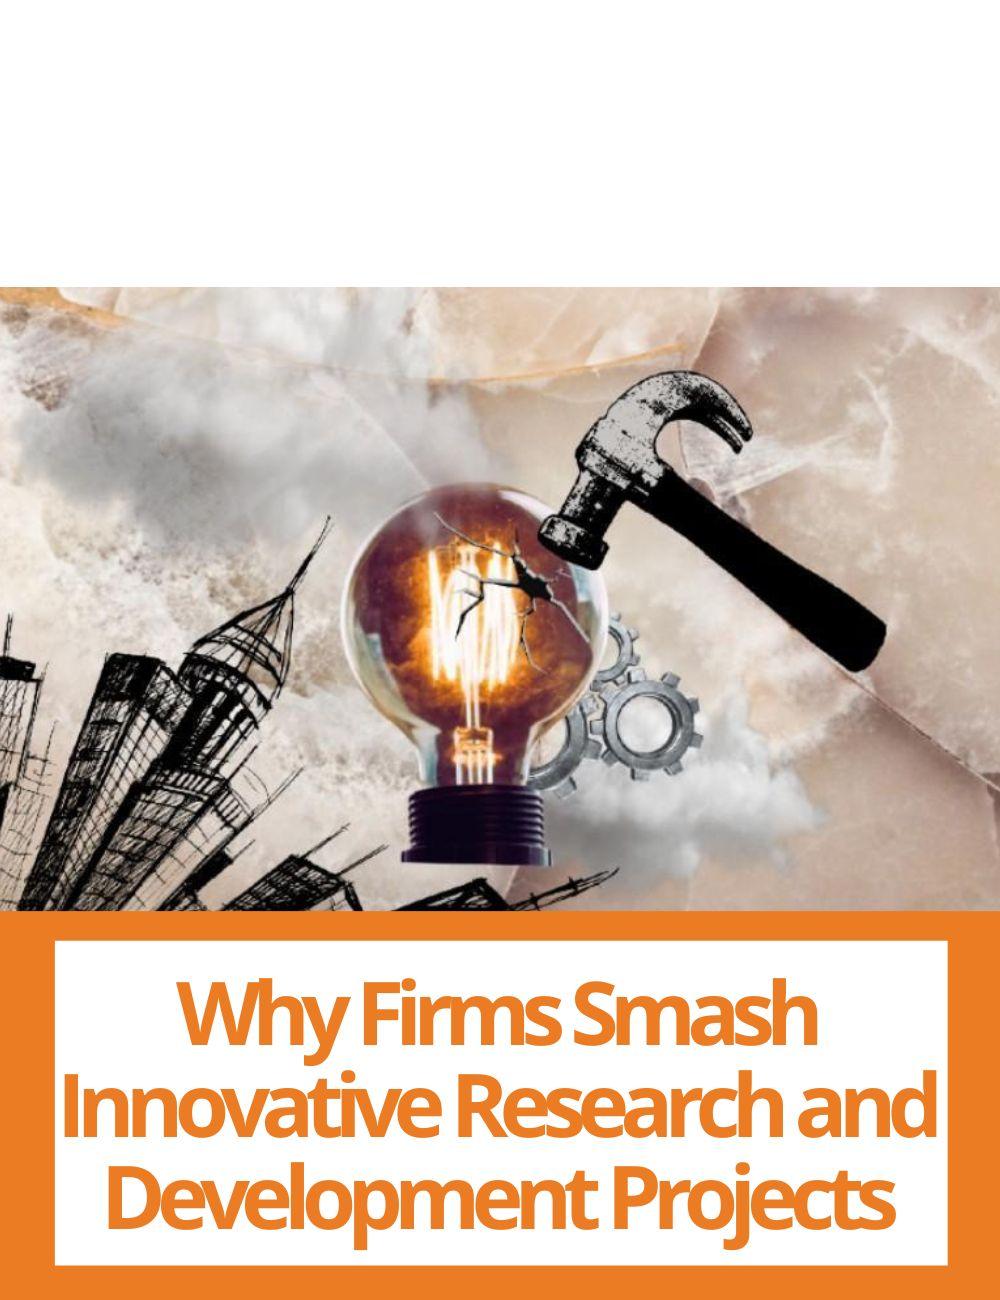 Link to related stories. Image: light bulb broken by a hammer. Story headline: Why Firms Smash Innovative Research and Development Projects